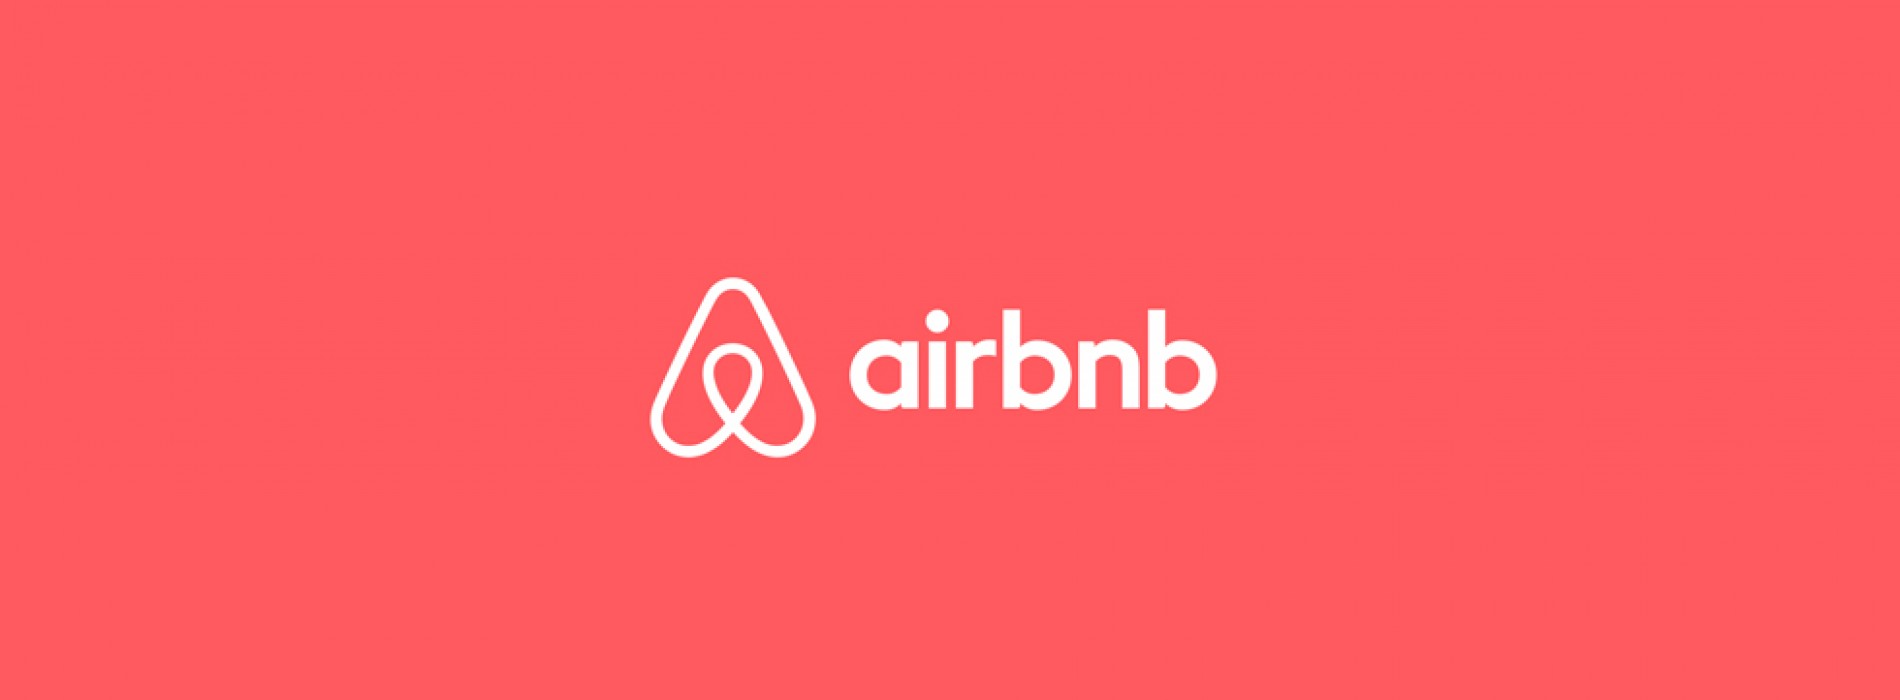 ‘Food defines the way Indians travel’ says Airbnb APAC travel survey